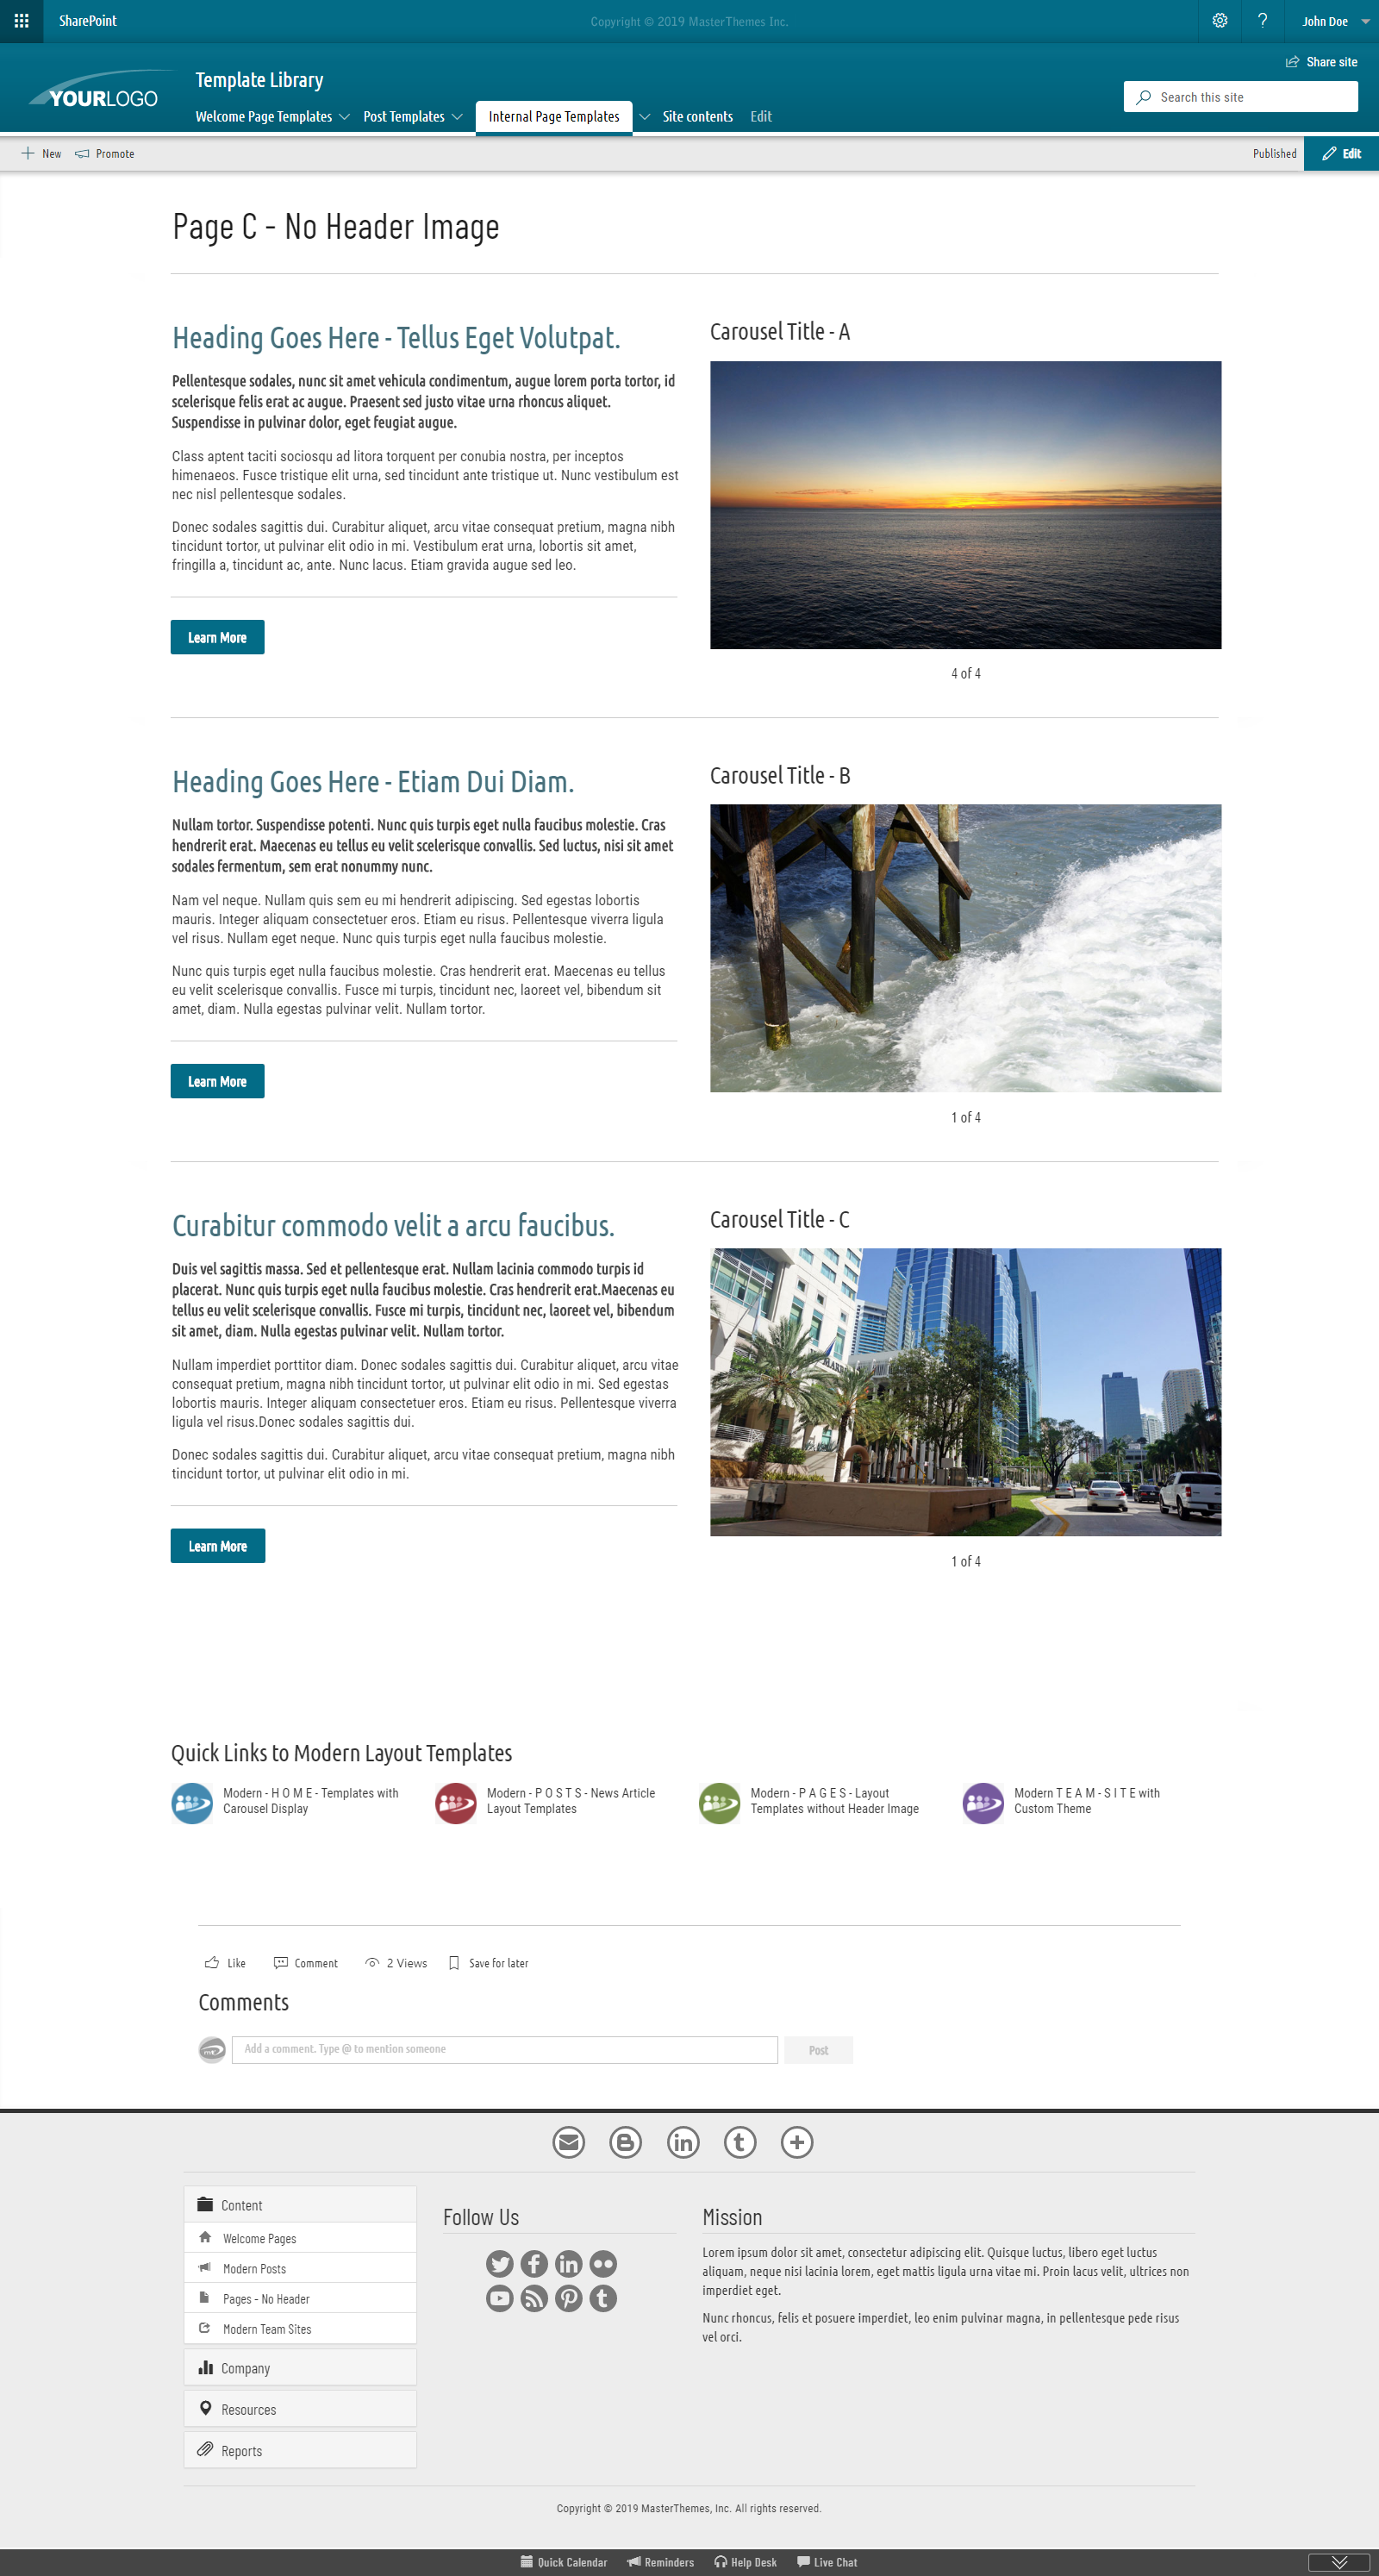 Layout Template - Page C without Header Image - Modern Template for SharePoint 2019